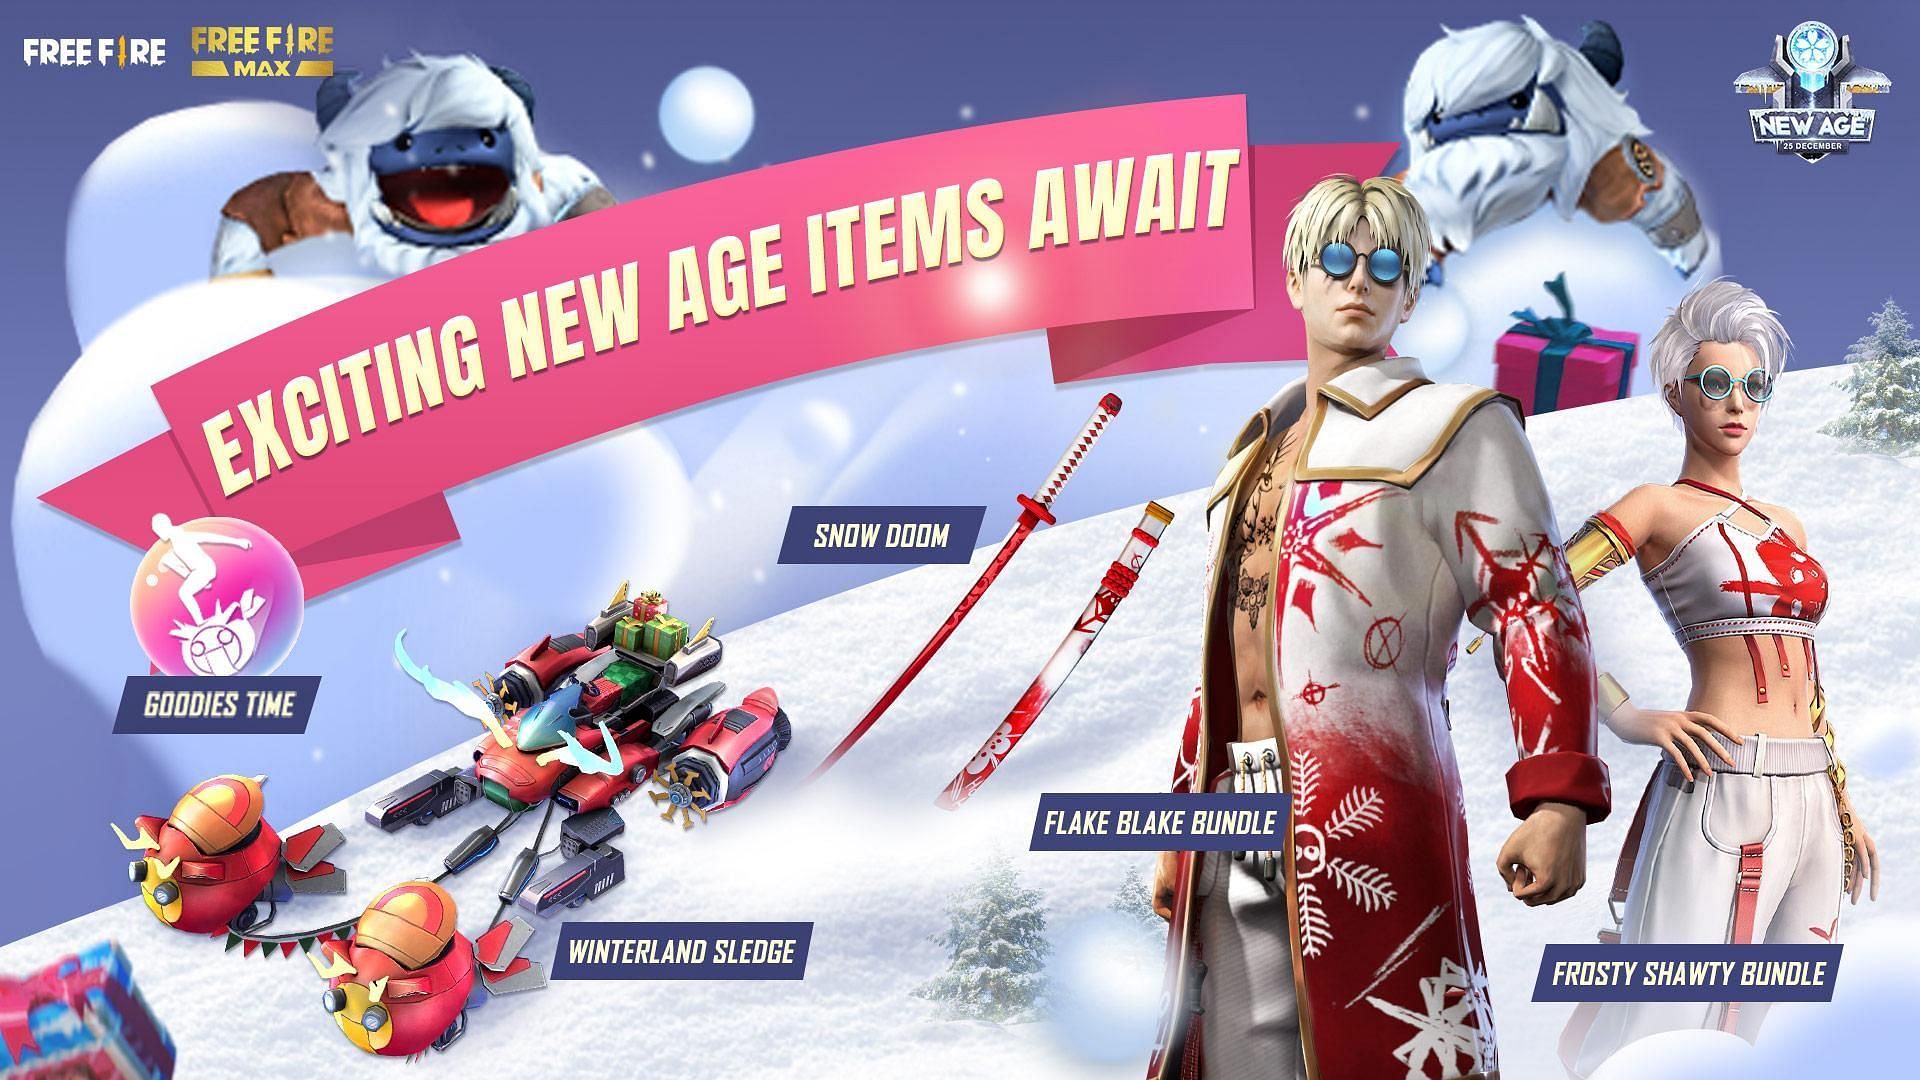 Free Fire New Age Campaign Exciting new items